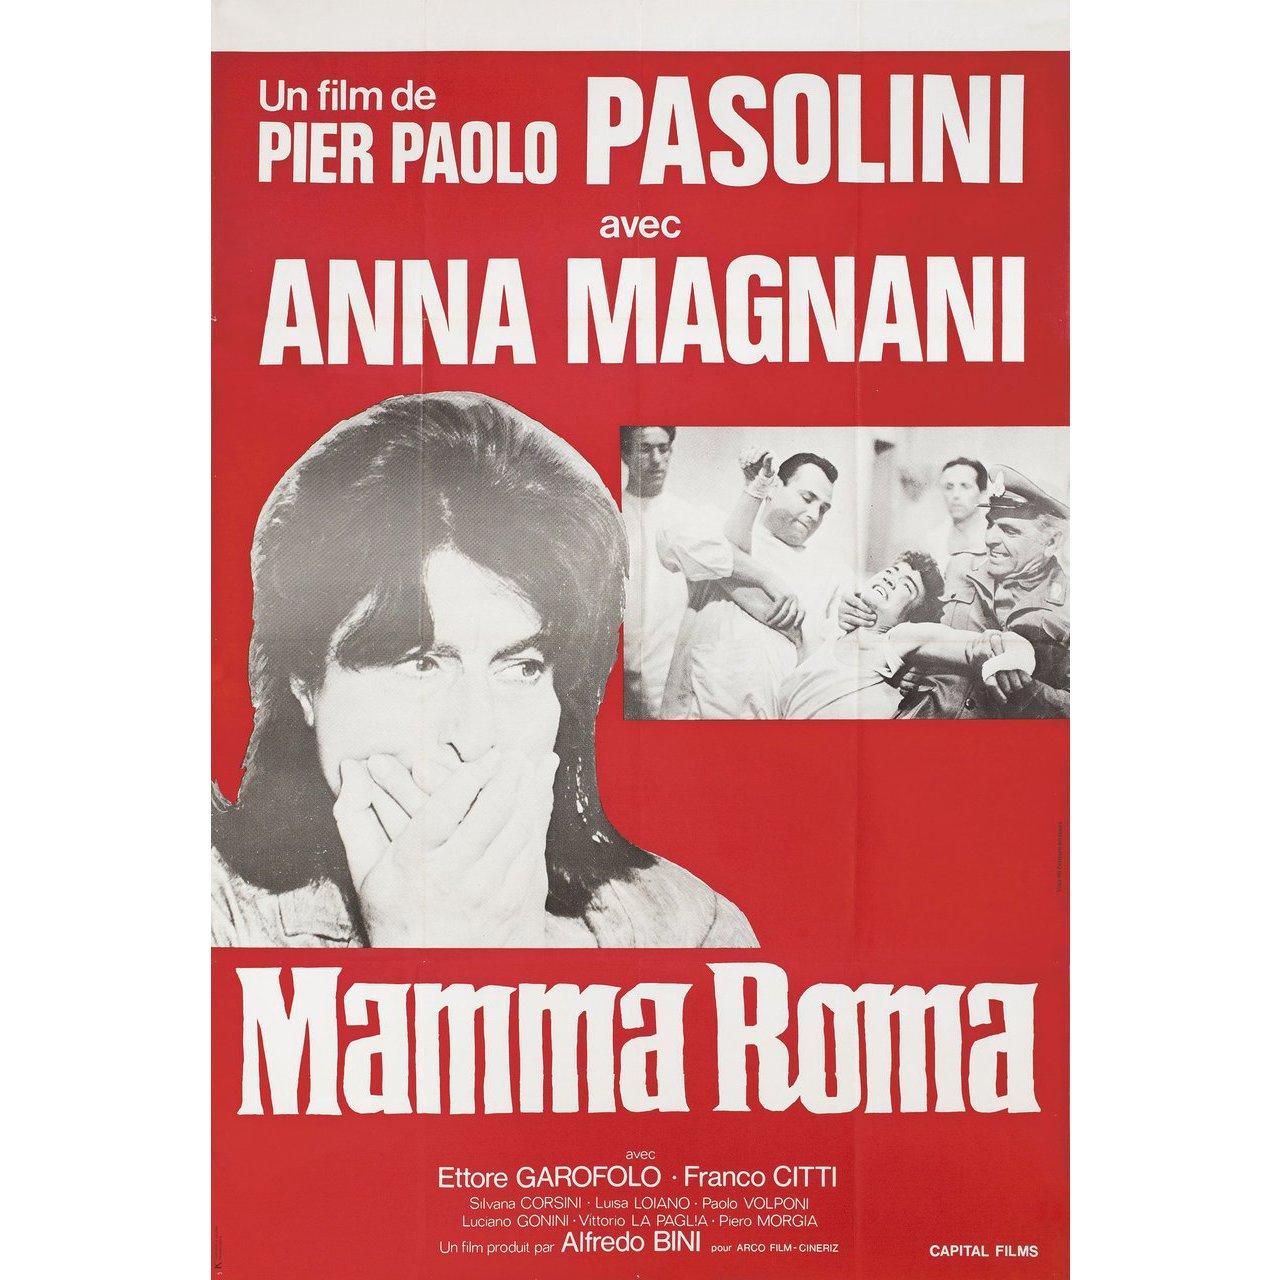 Original 1960s re-release French grande poster for the film Mamma Roma directed by Pier Paolo Pasolini with Anna Magnani / Ettore Garofolo / Franco Citti / Silvana Corsini. Very Good-Fine condition, folded. Many original posters were issued folded